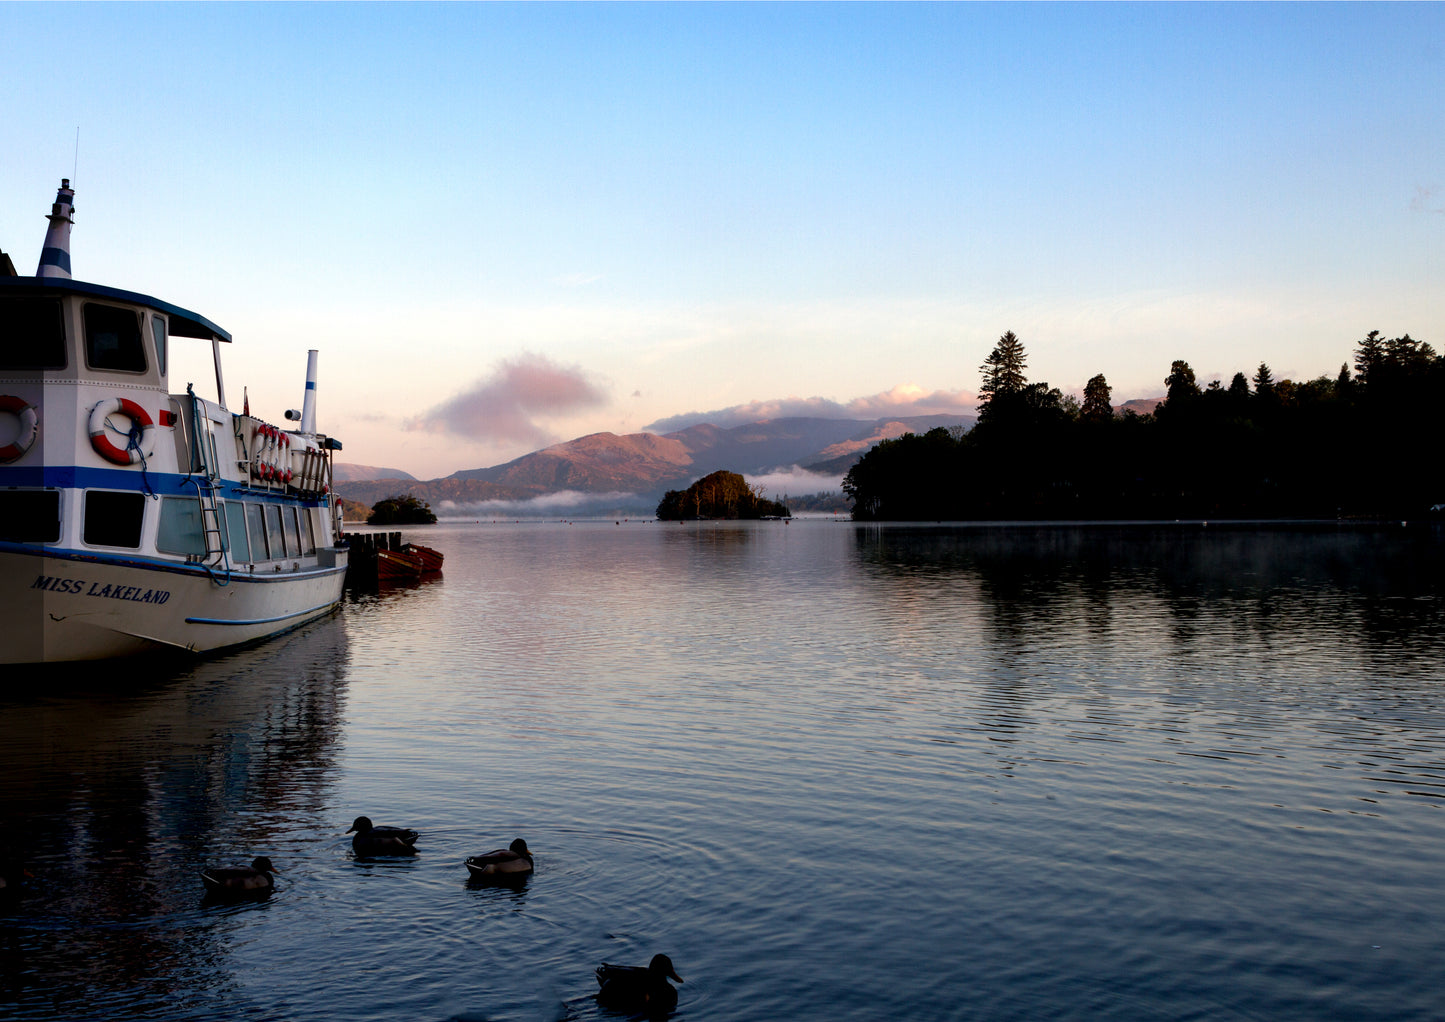 Greeting Card - Bowness on Windermere